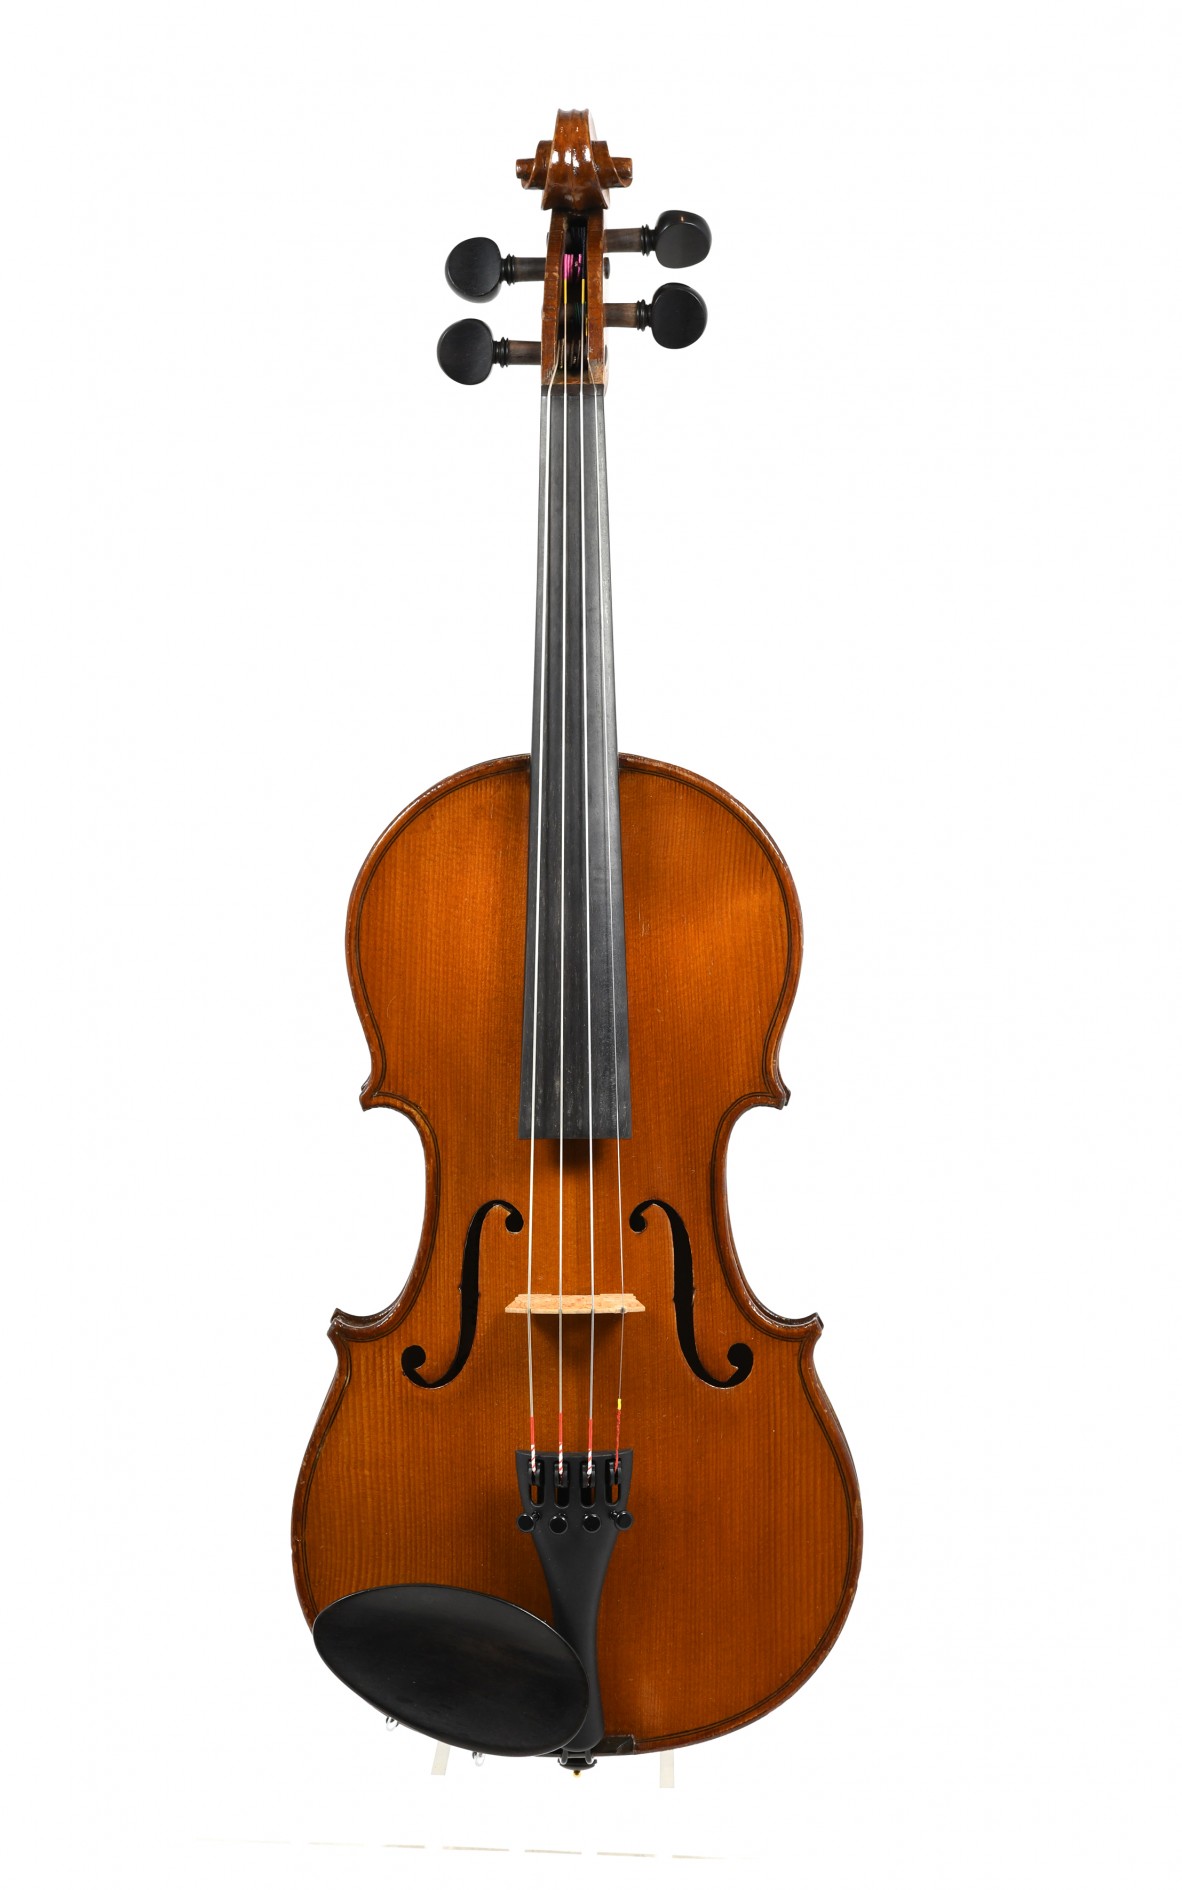 3/4 sized French violin after Stradivari, approx. 1900 - top